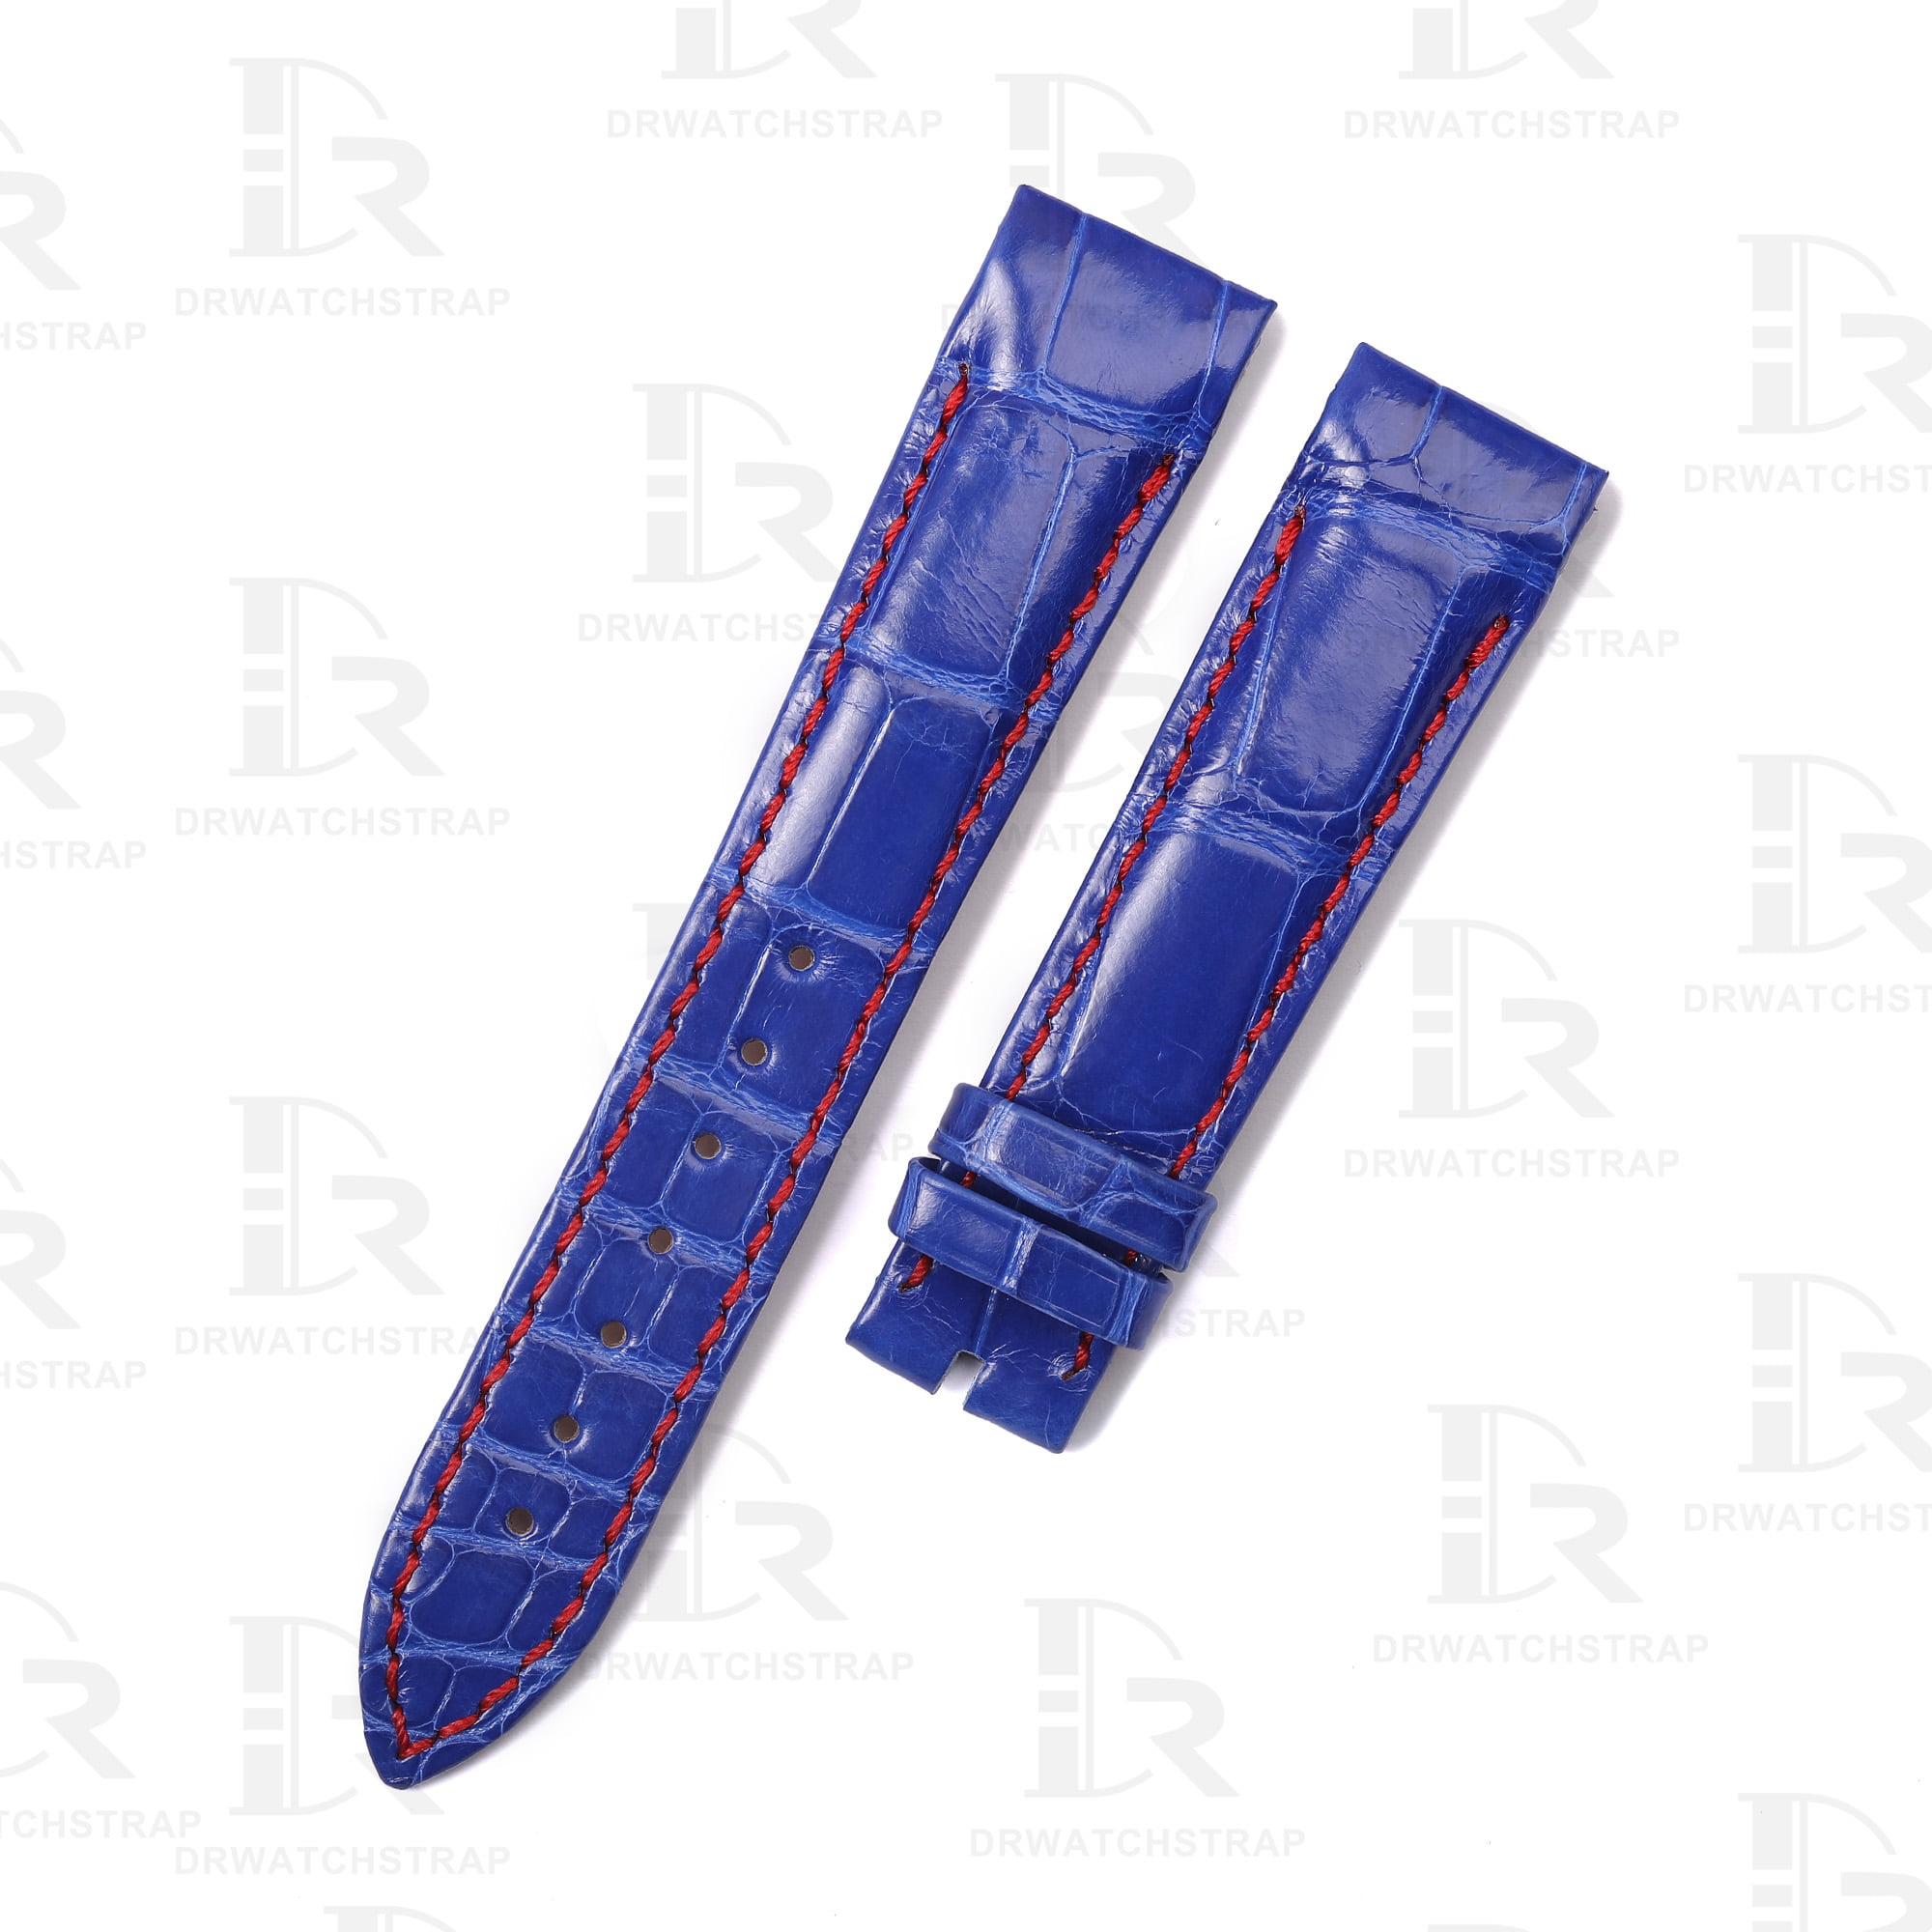 Replacement Aftermarket Blue leather watch band for Franck Muller Conquistador 8006 SC strap (2)